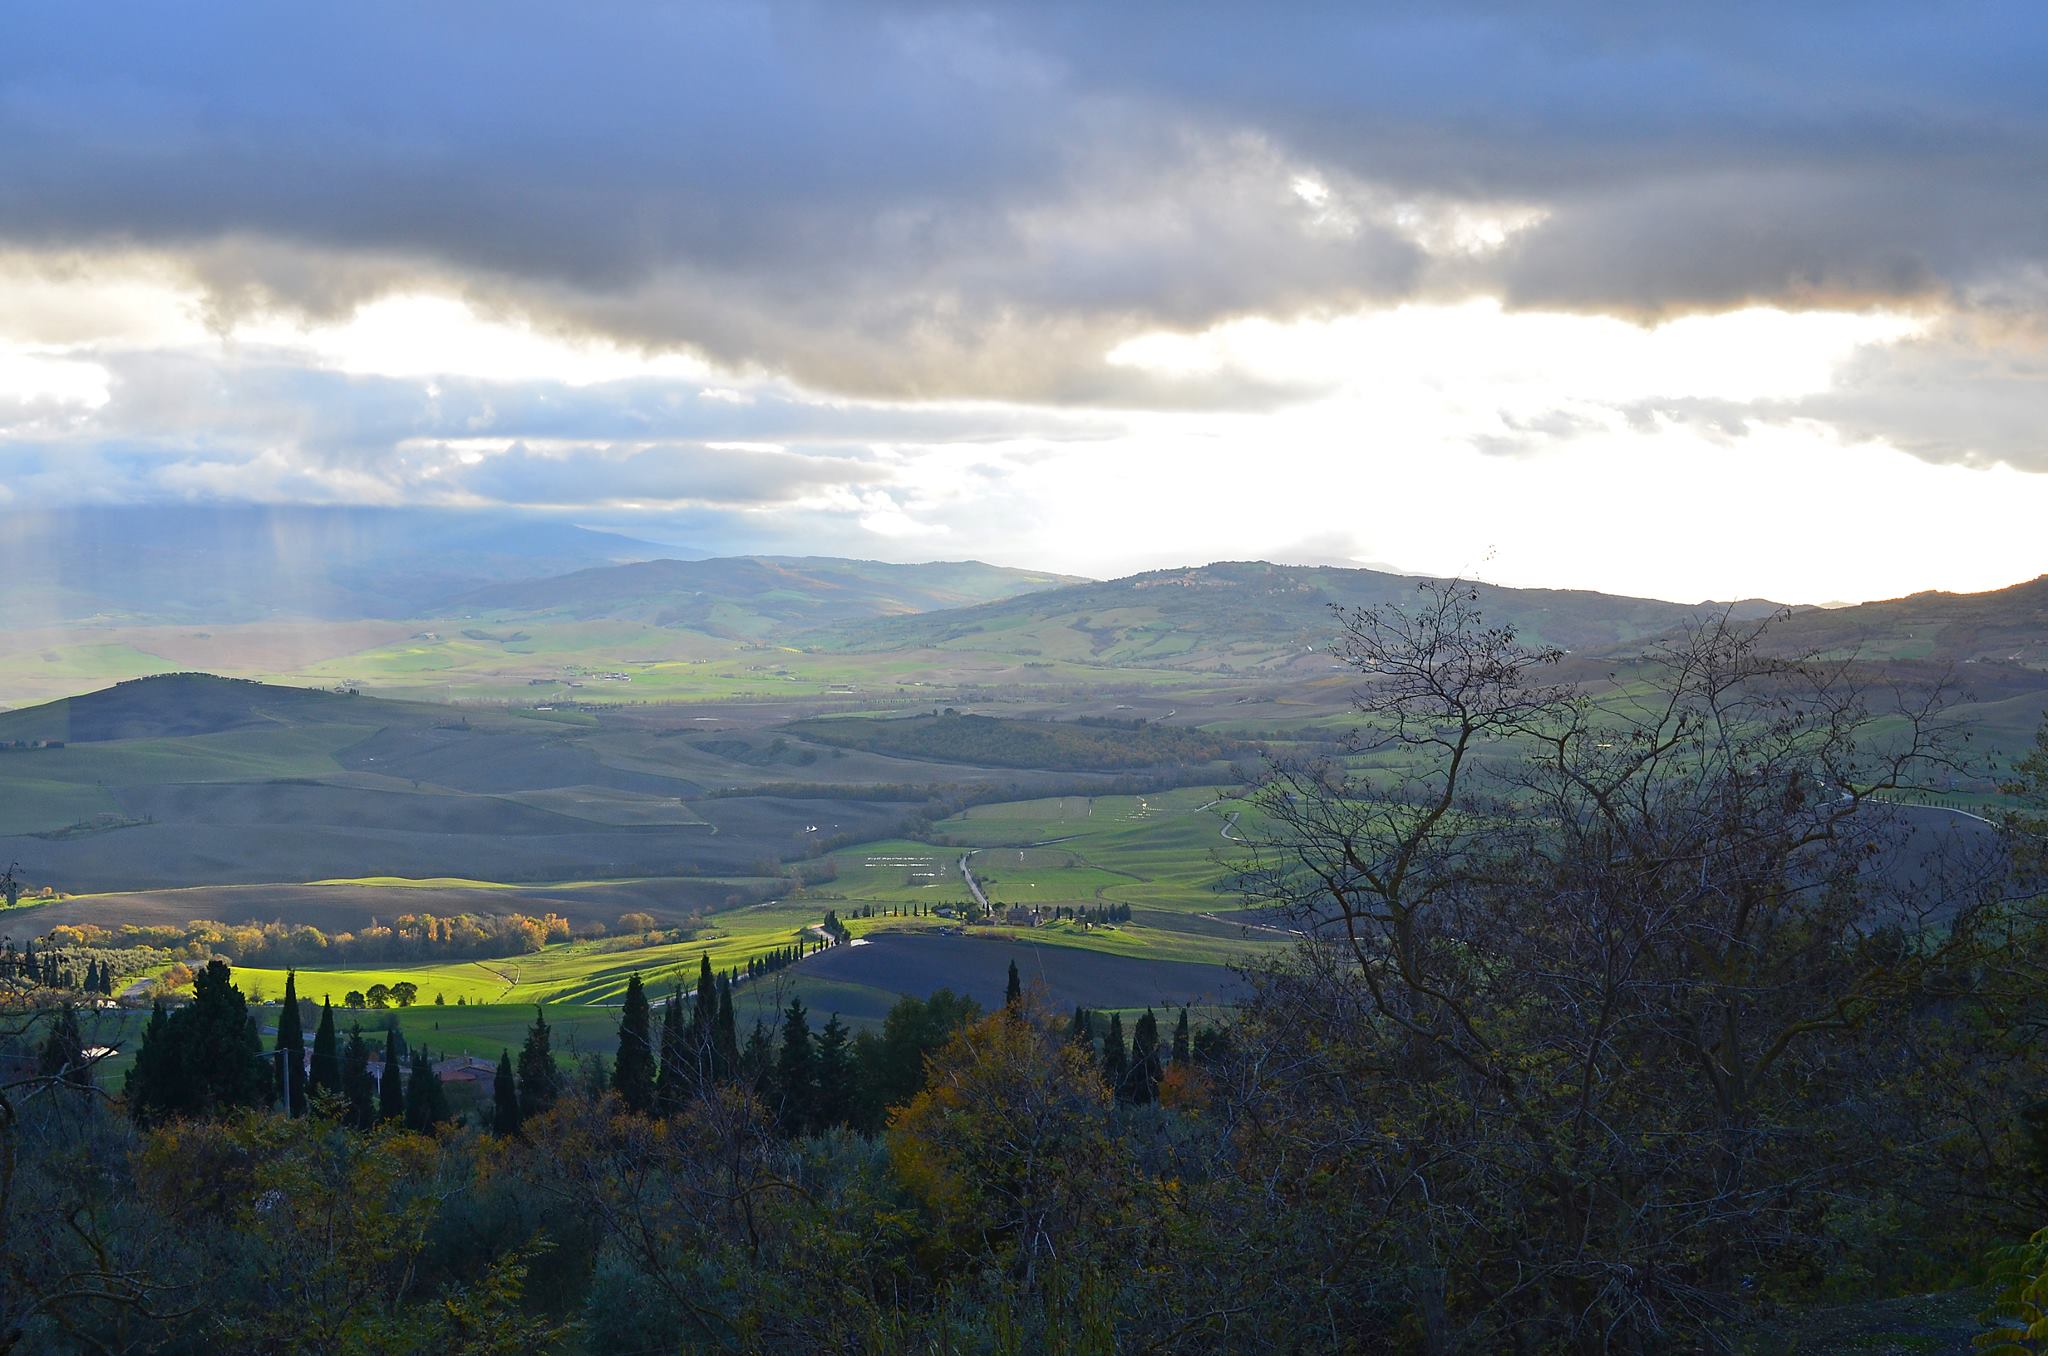 Pienza INTERVIEW: For The Love of Italy